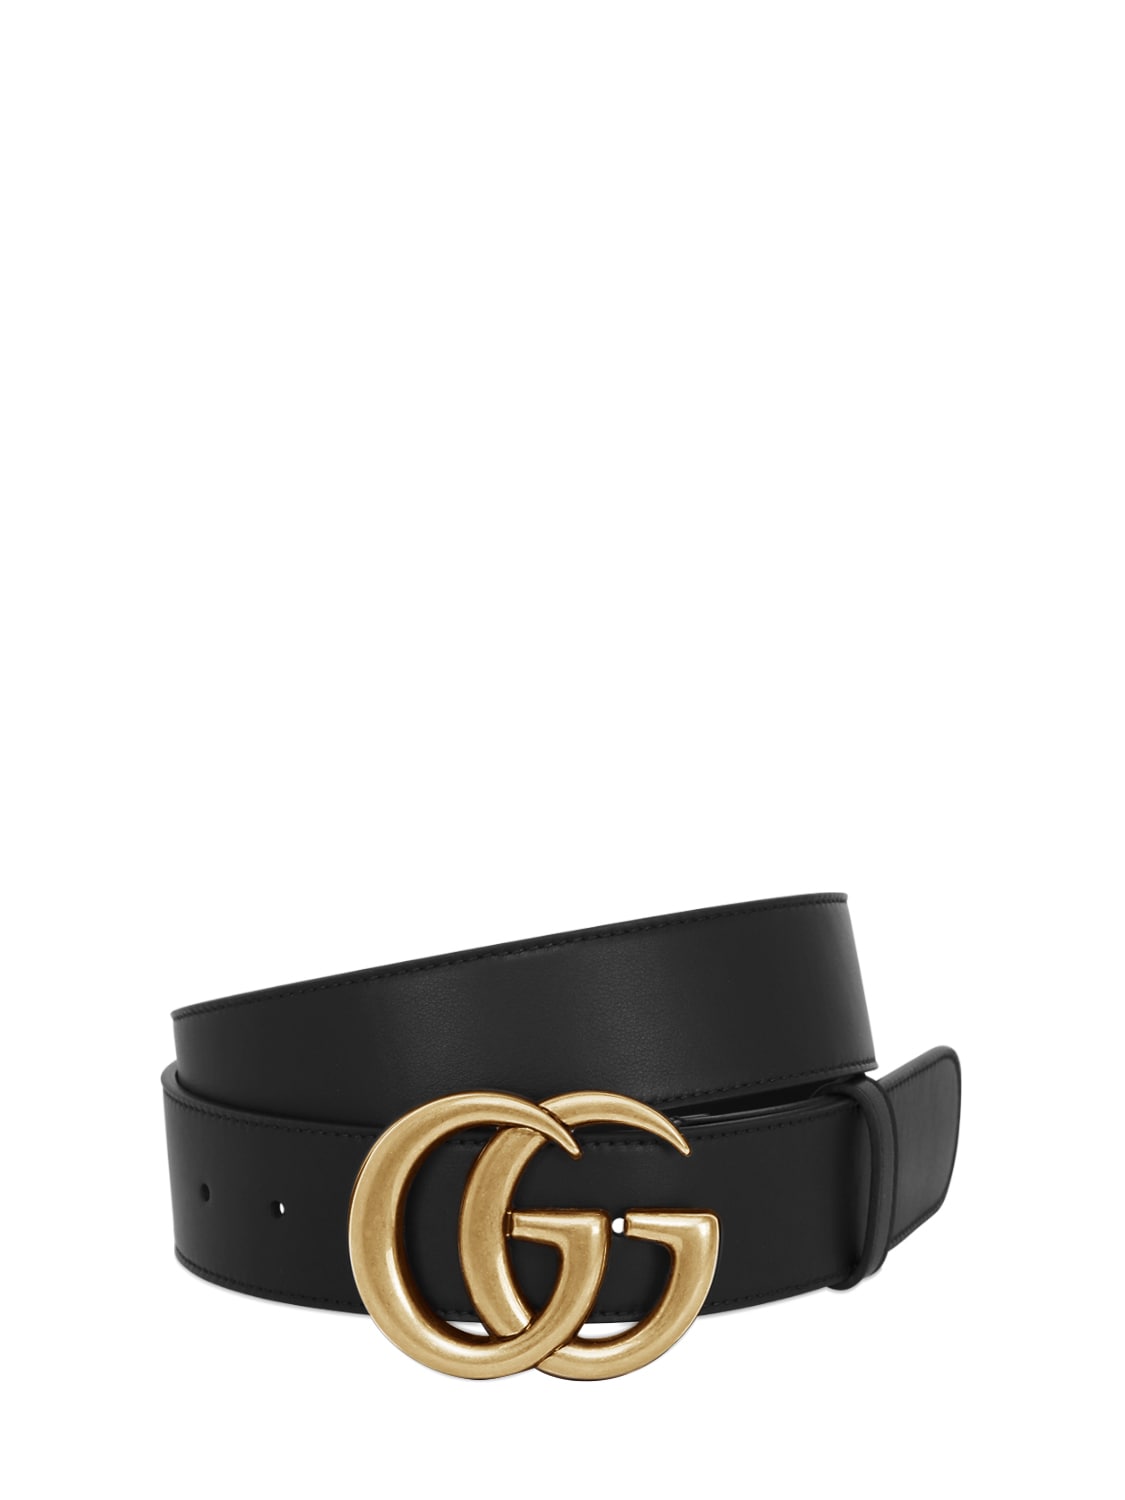 40mm Gg Gold Buckle Leather Belt | The Fashionisto